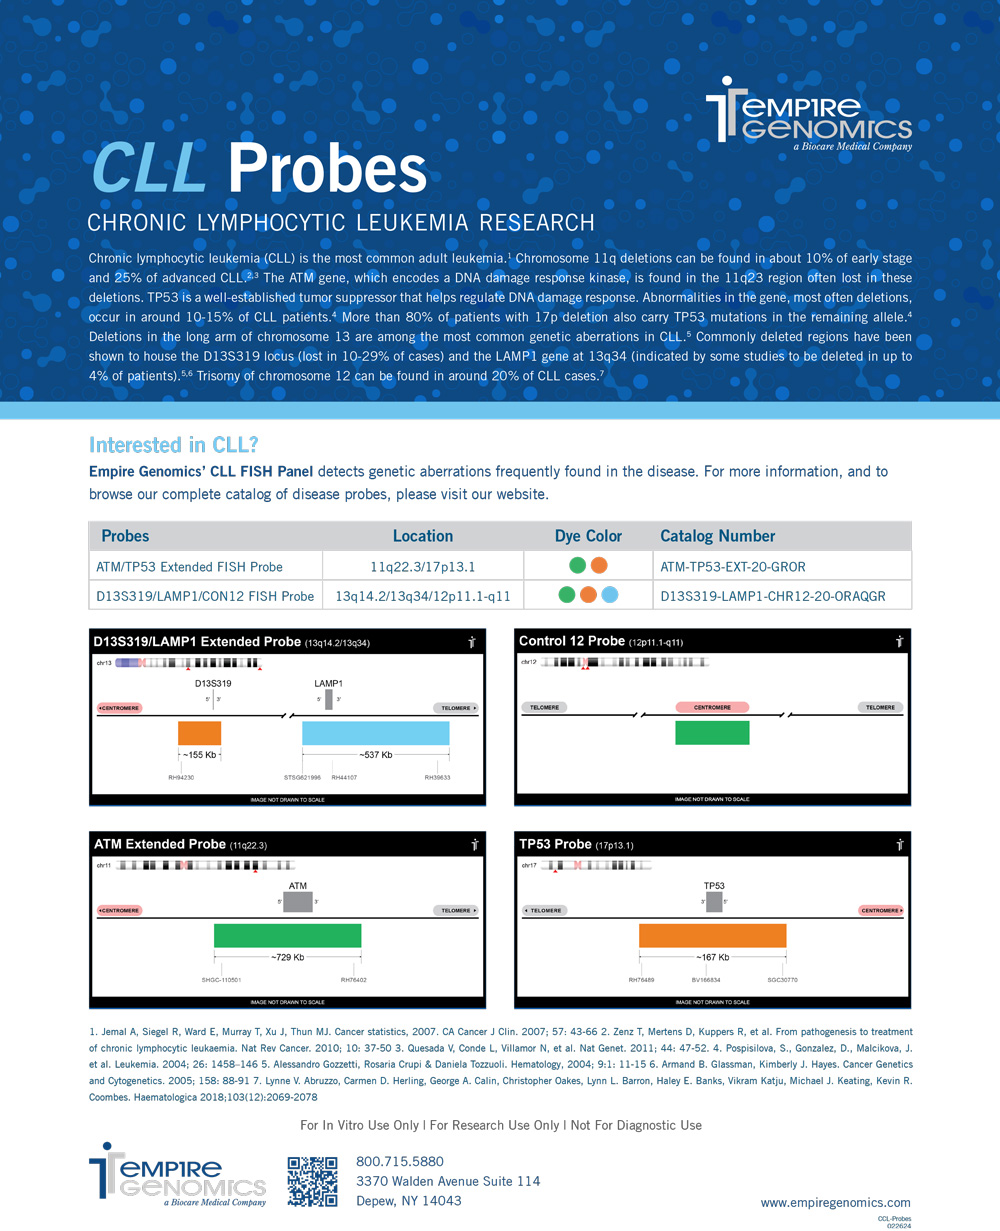 CLL Probes